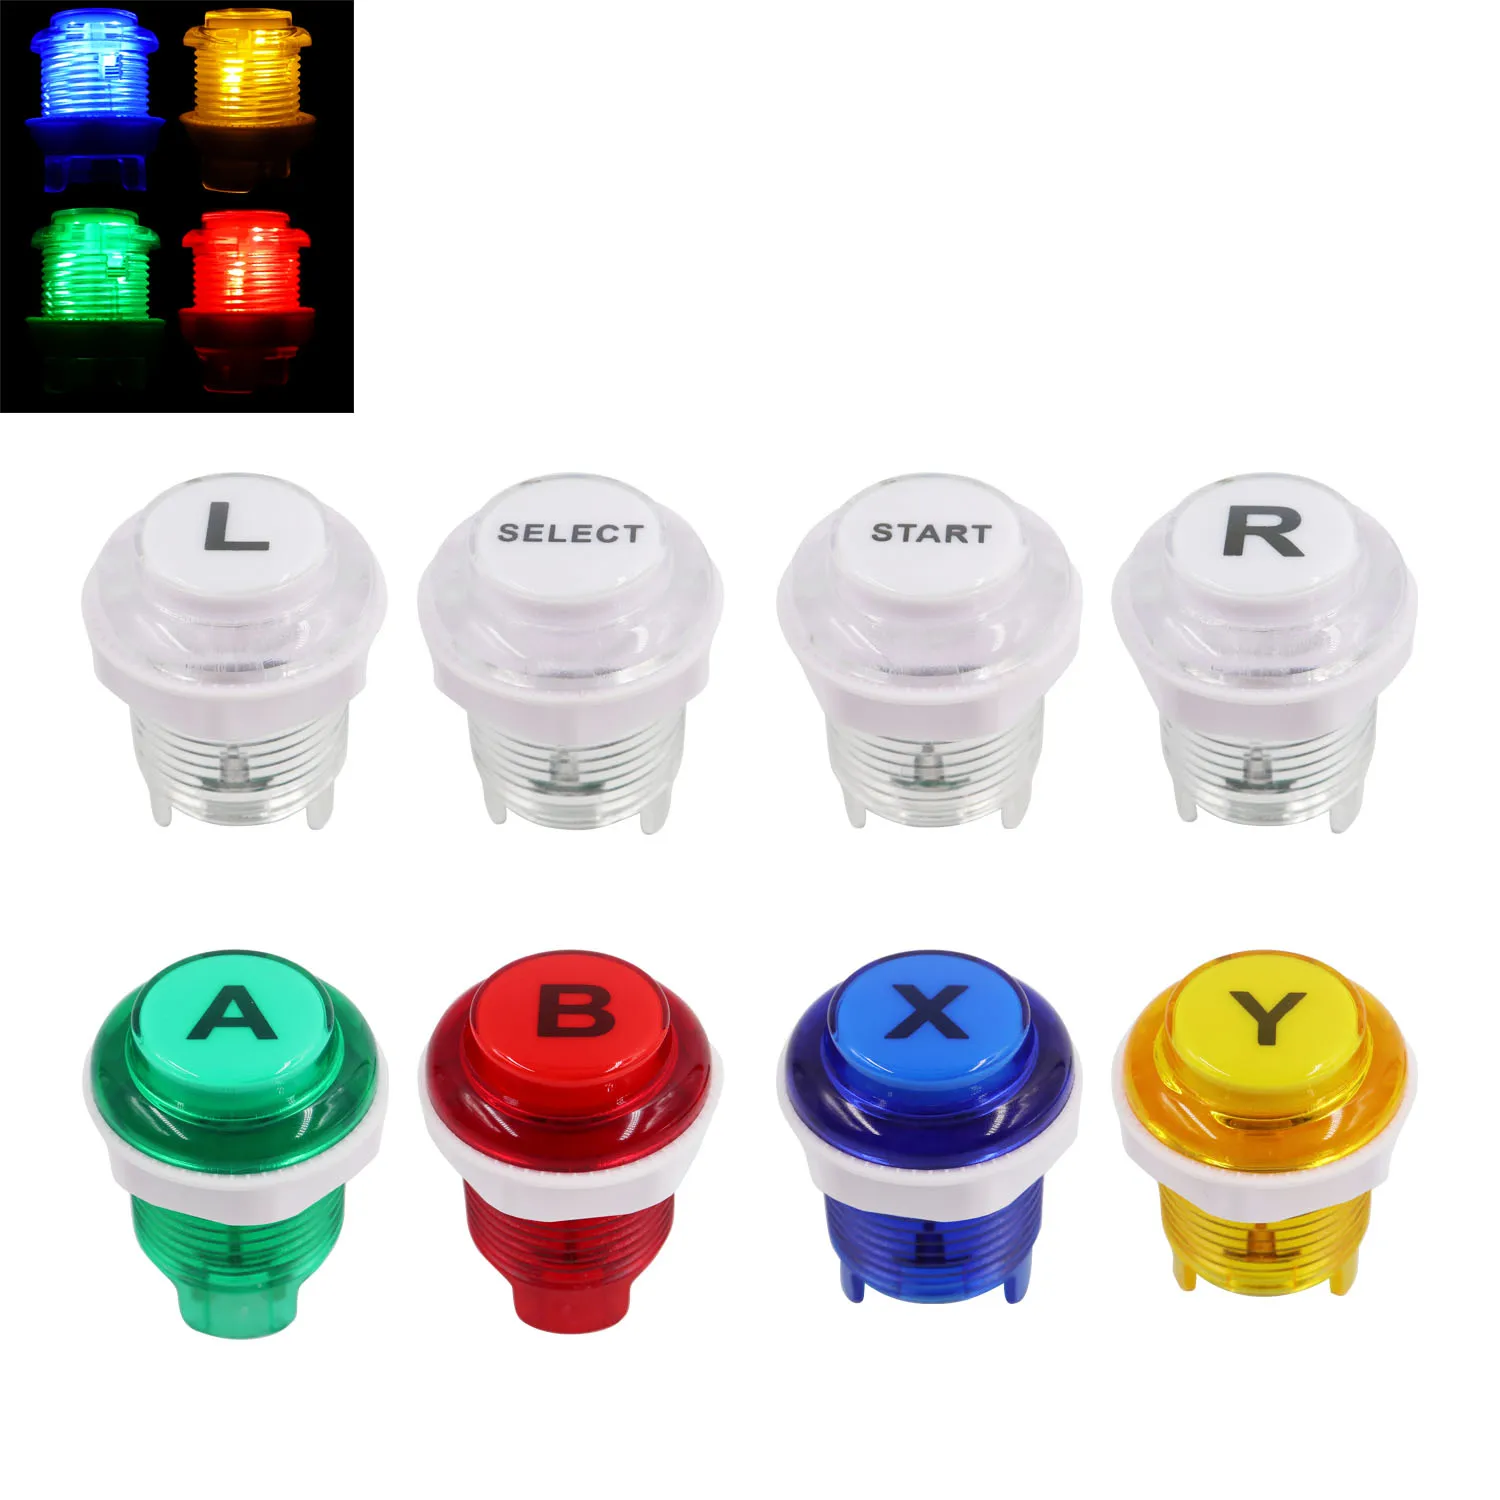 SJ@JX 8 PCS Arcade Game LED Push Buttons with Cherry MX Microswitch Logo X Y Start Select for PC MAME Raspberry Pi